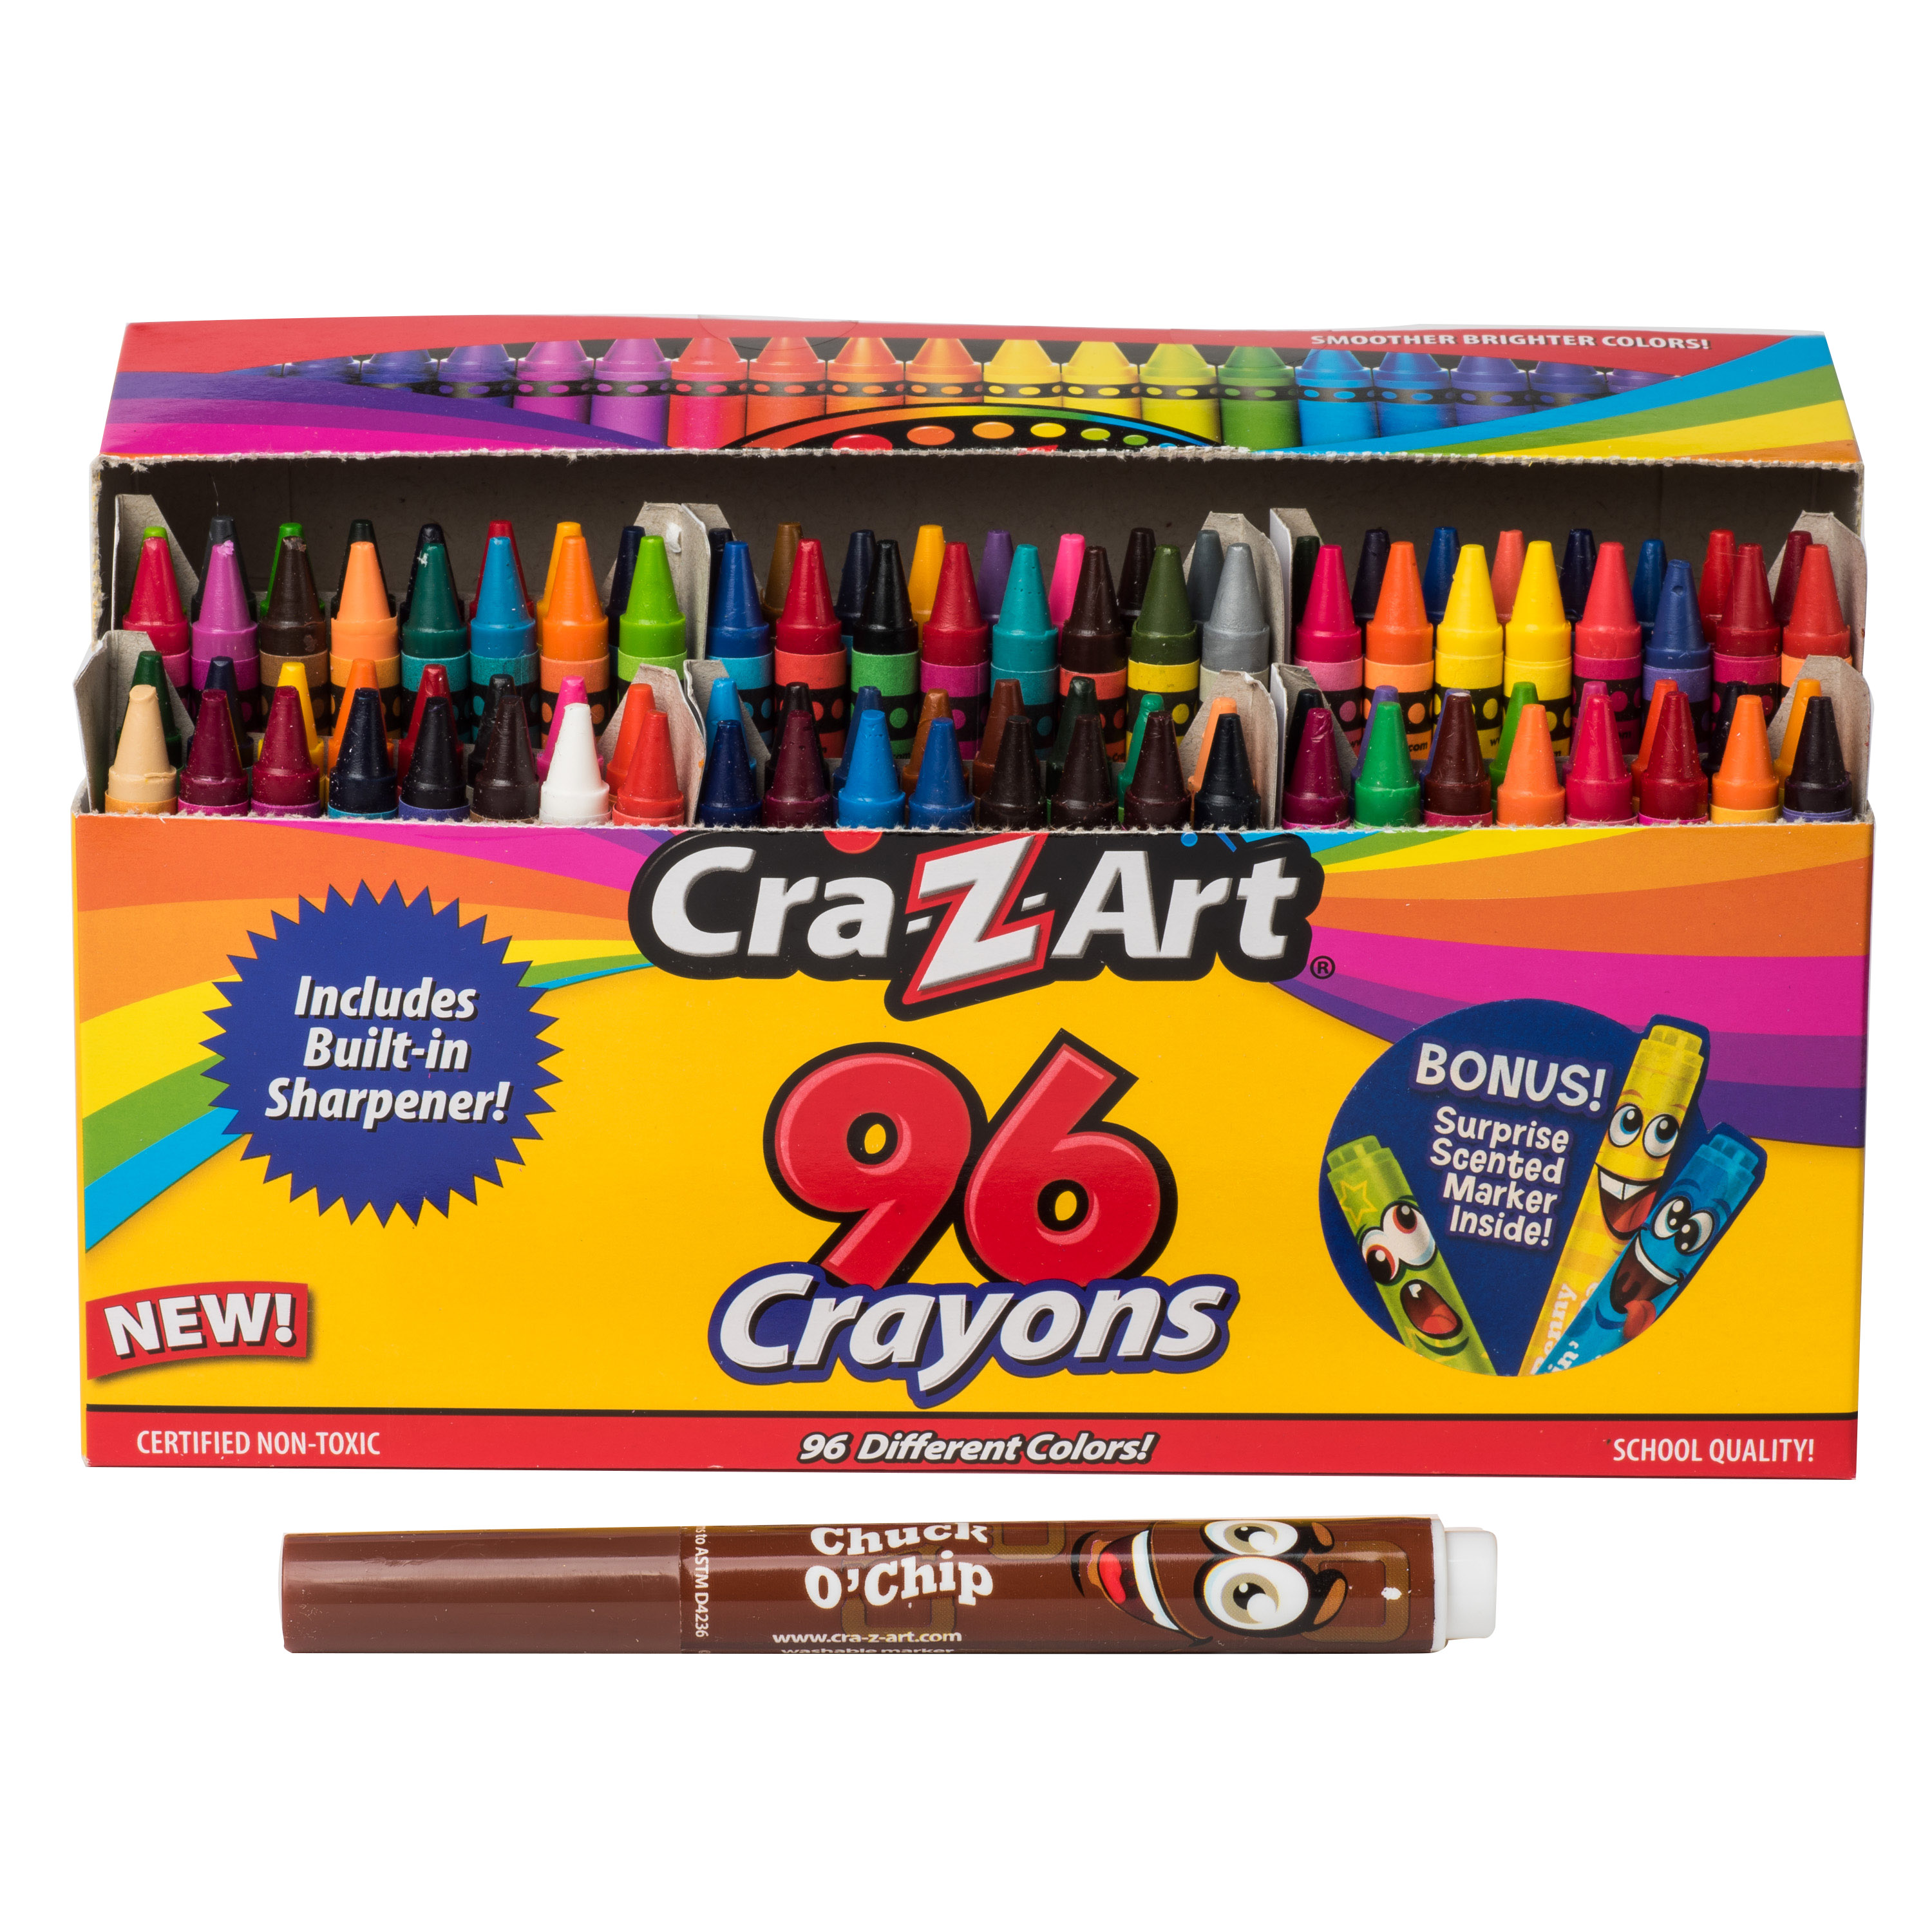 Cra-Z-Art 96 Count Crayons, Bulk Pack with Built-in Sharpener, Multicolor, Back to School - image 5 of 10